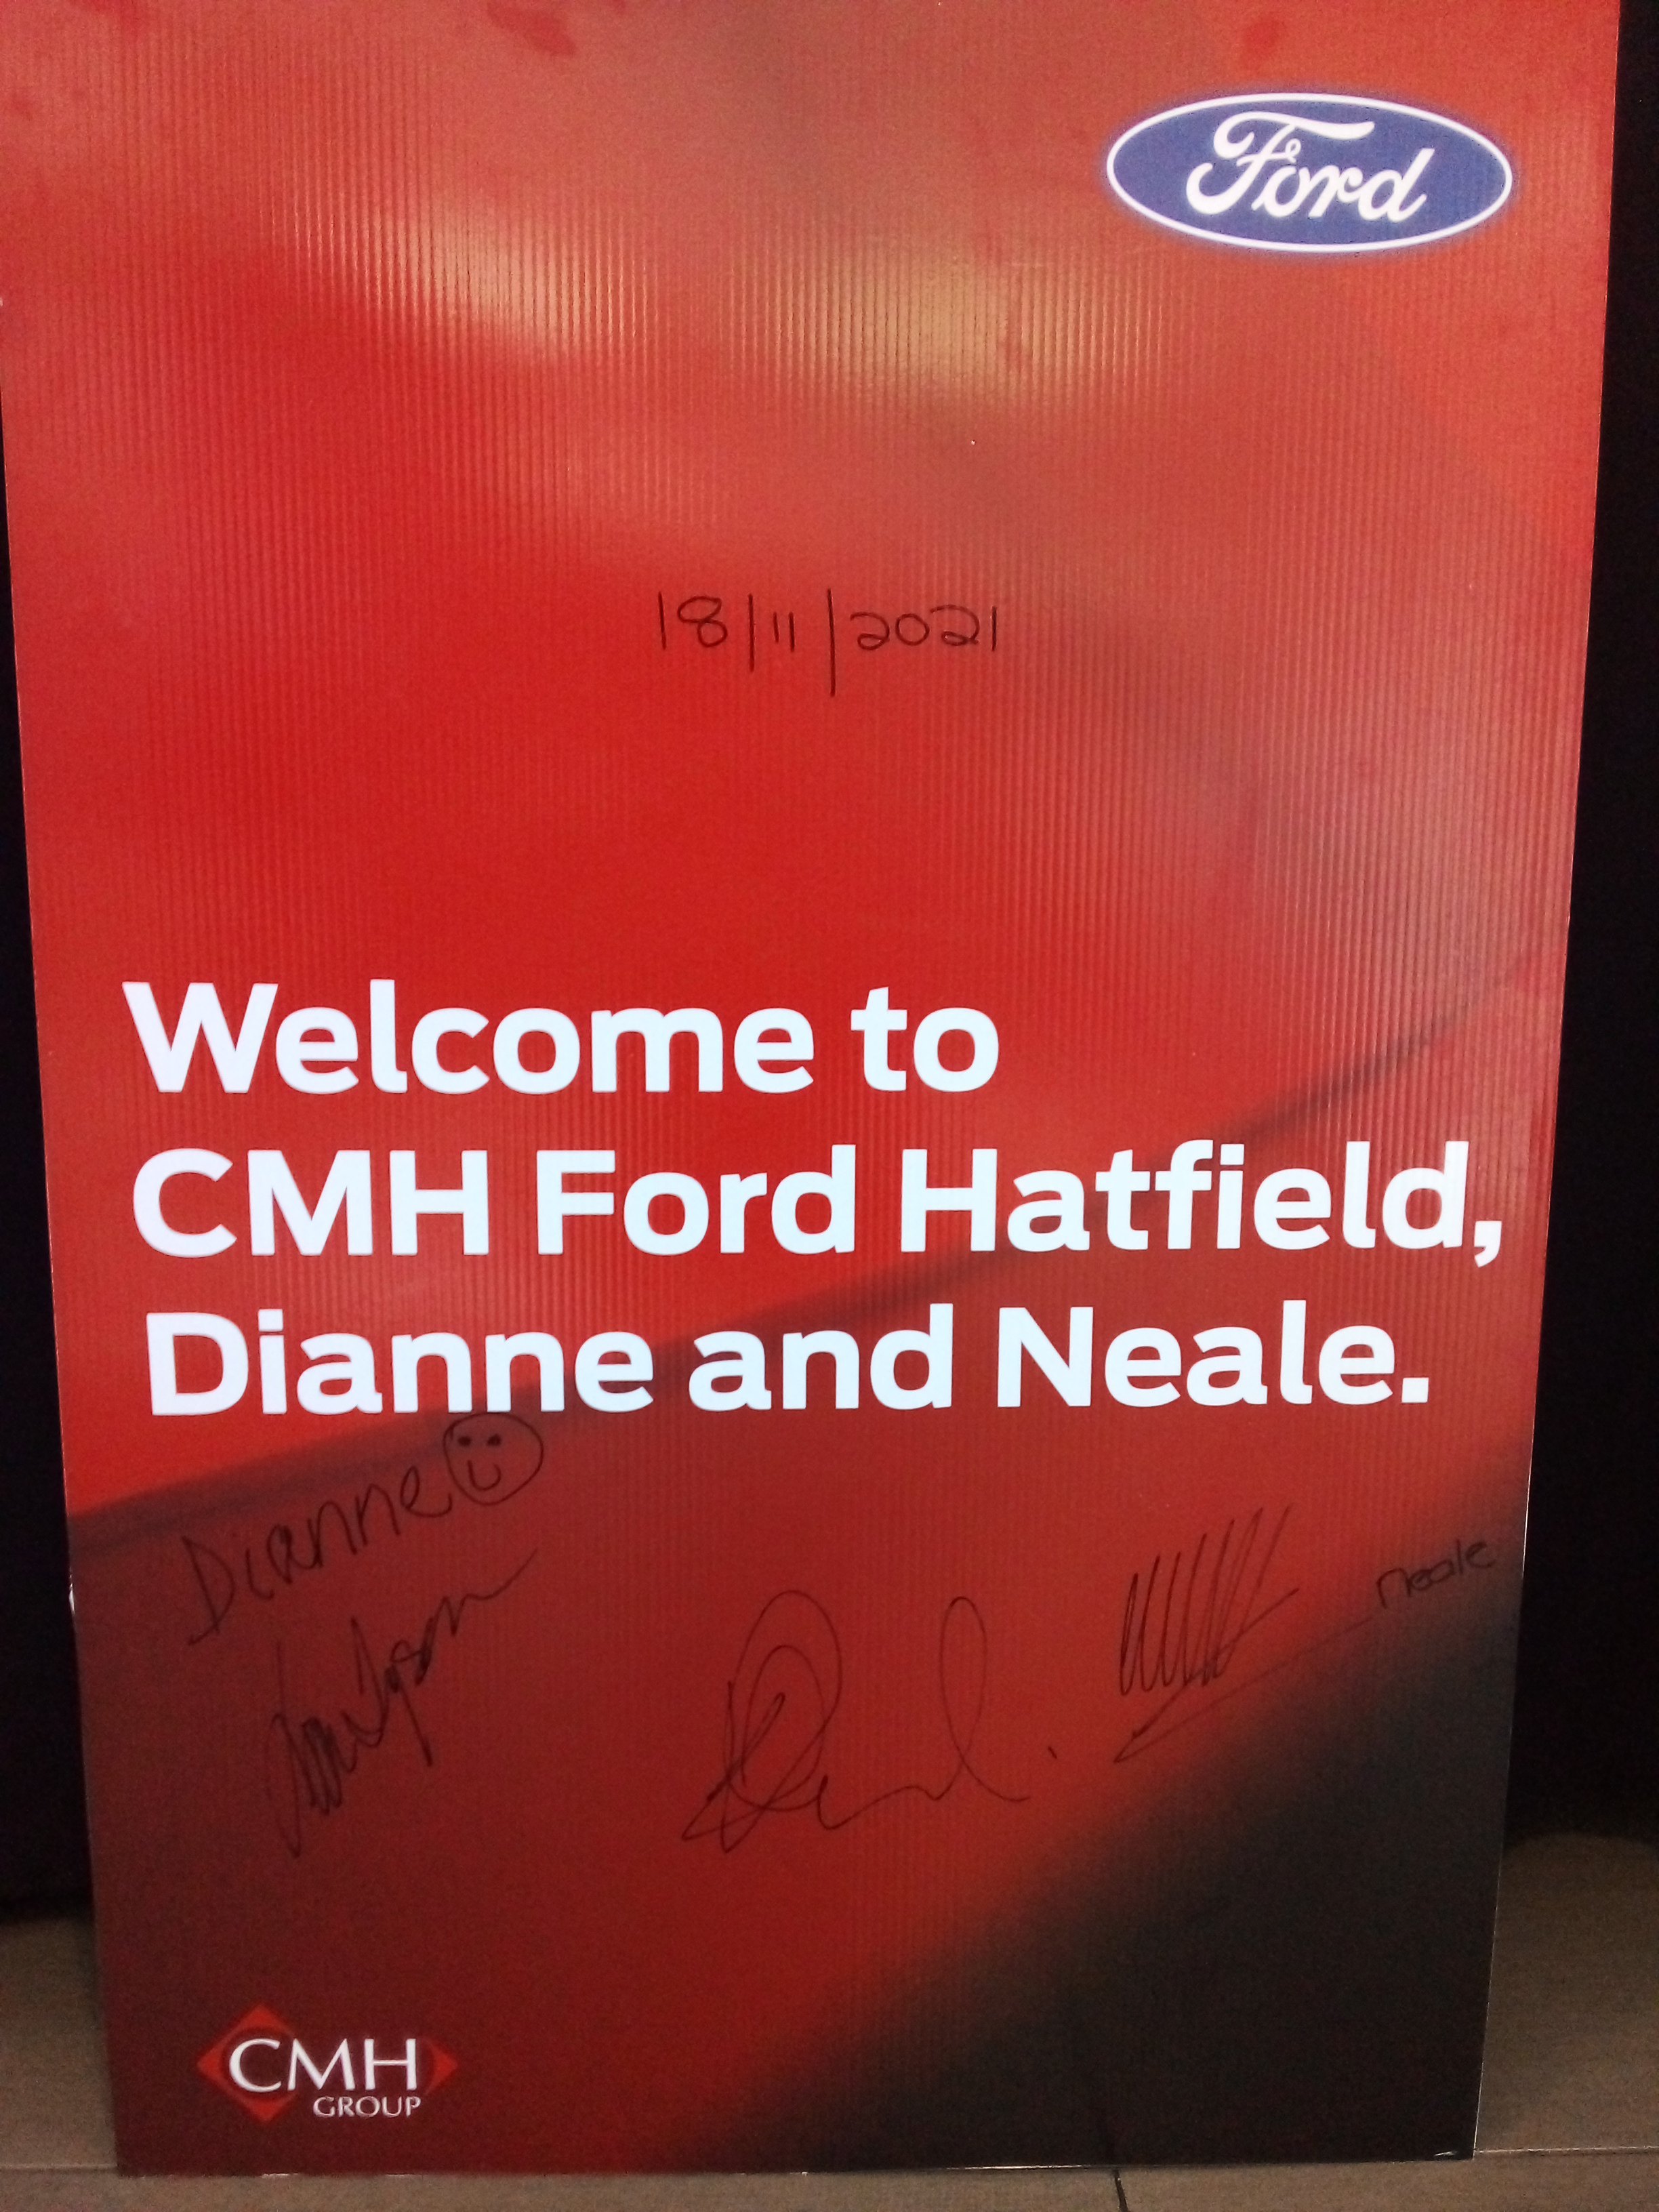 CMH-Ford-Hatfield-Neal-and-Dianne-Image-3